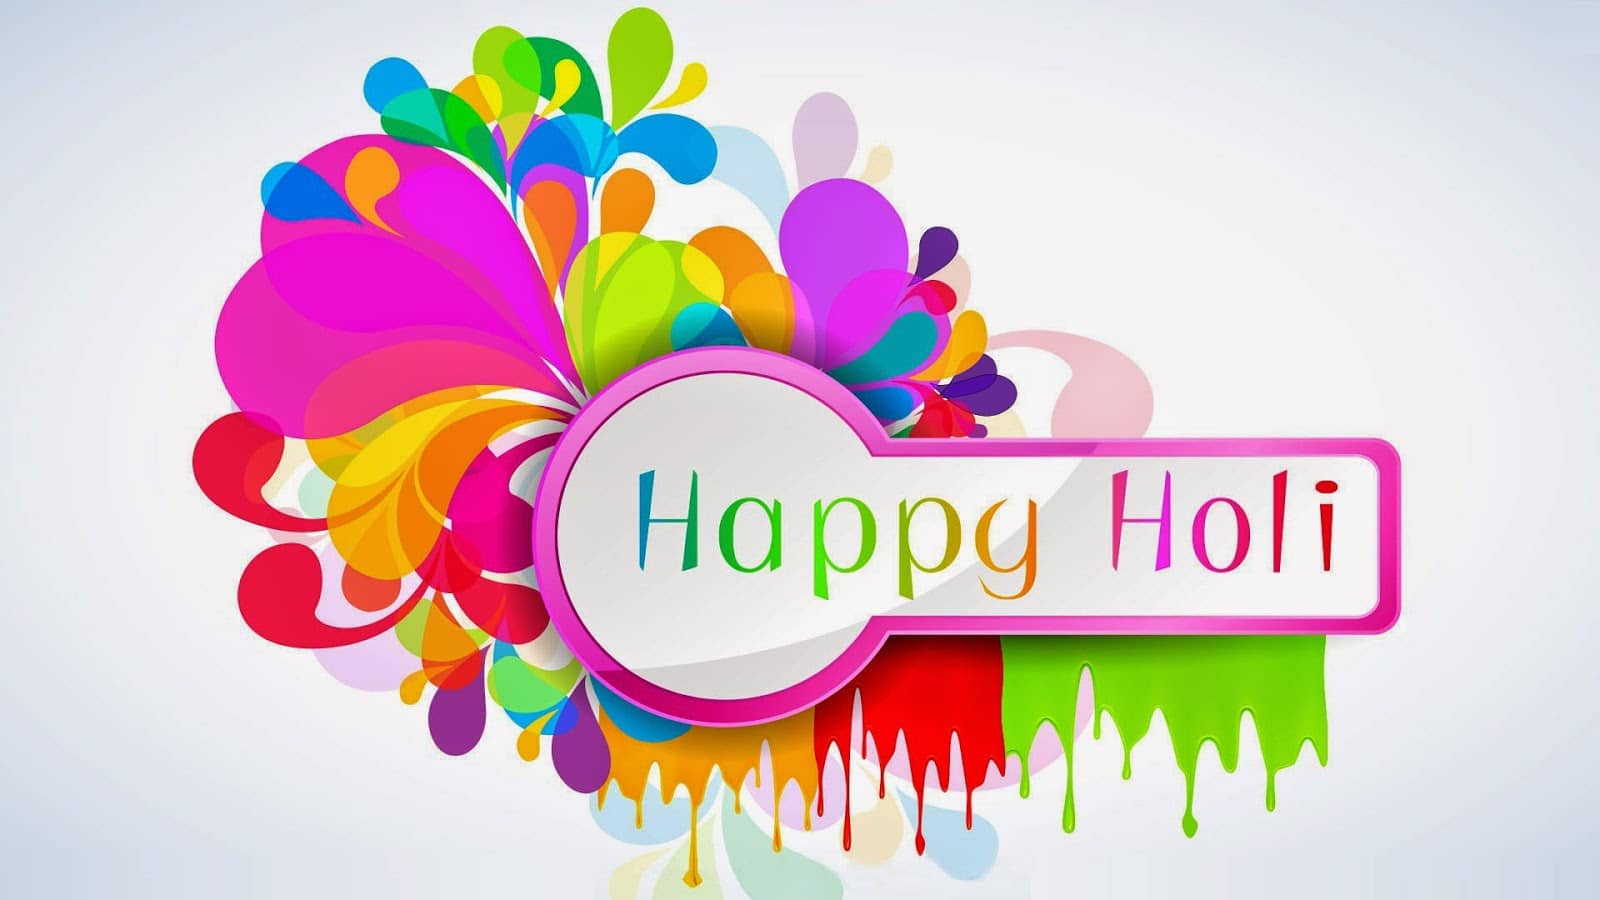 Happy Holi 2019 Hd Images & Wallpapers With Wishes, - Happy Holi Hd Images 2019 , HD Wallpaper & Backgrounds